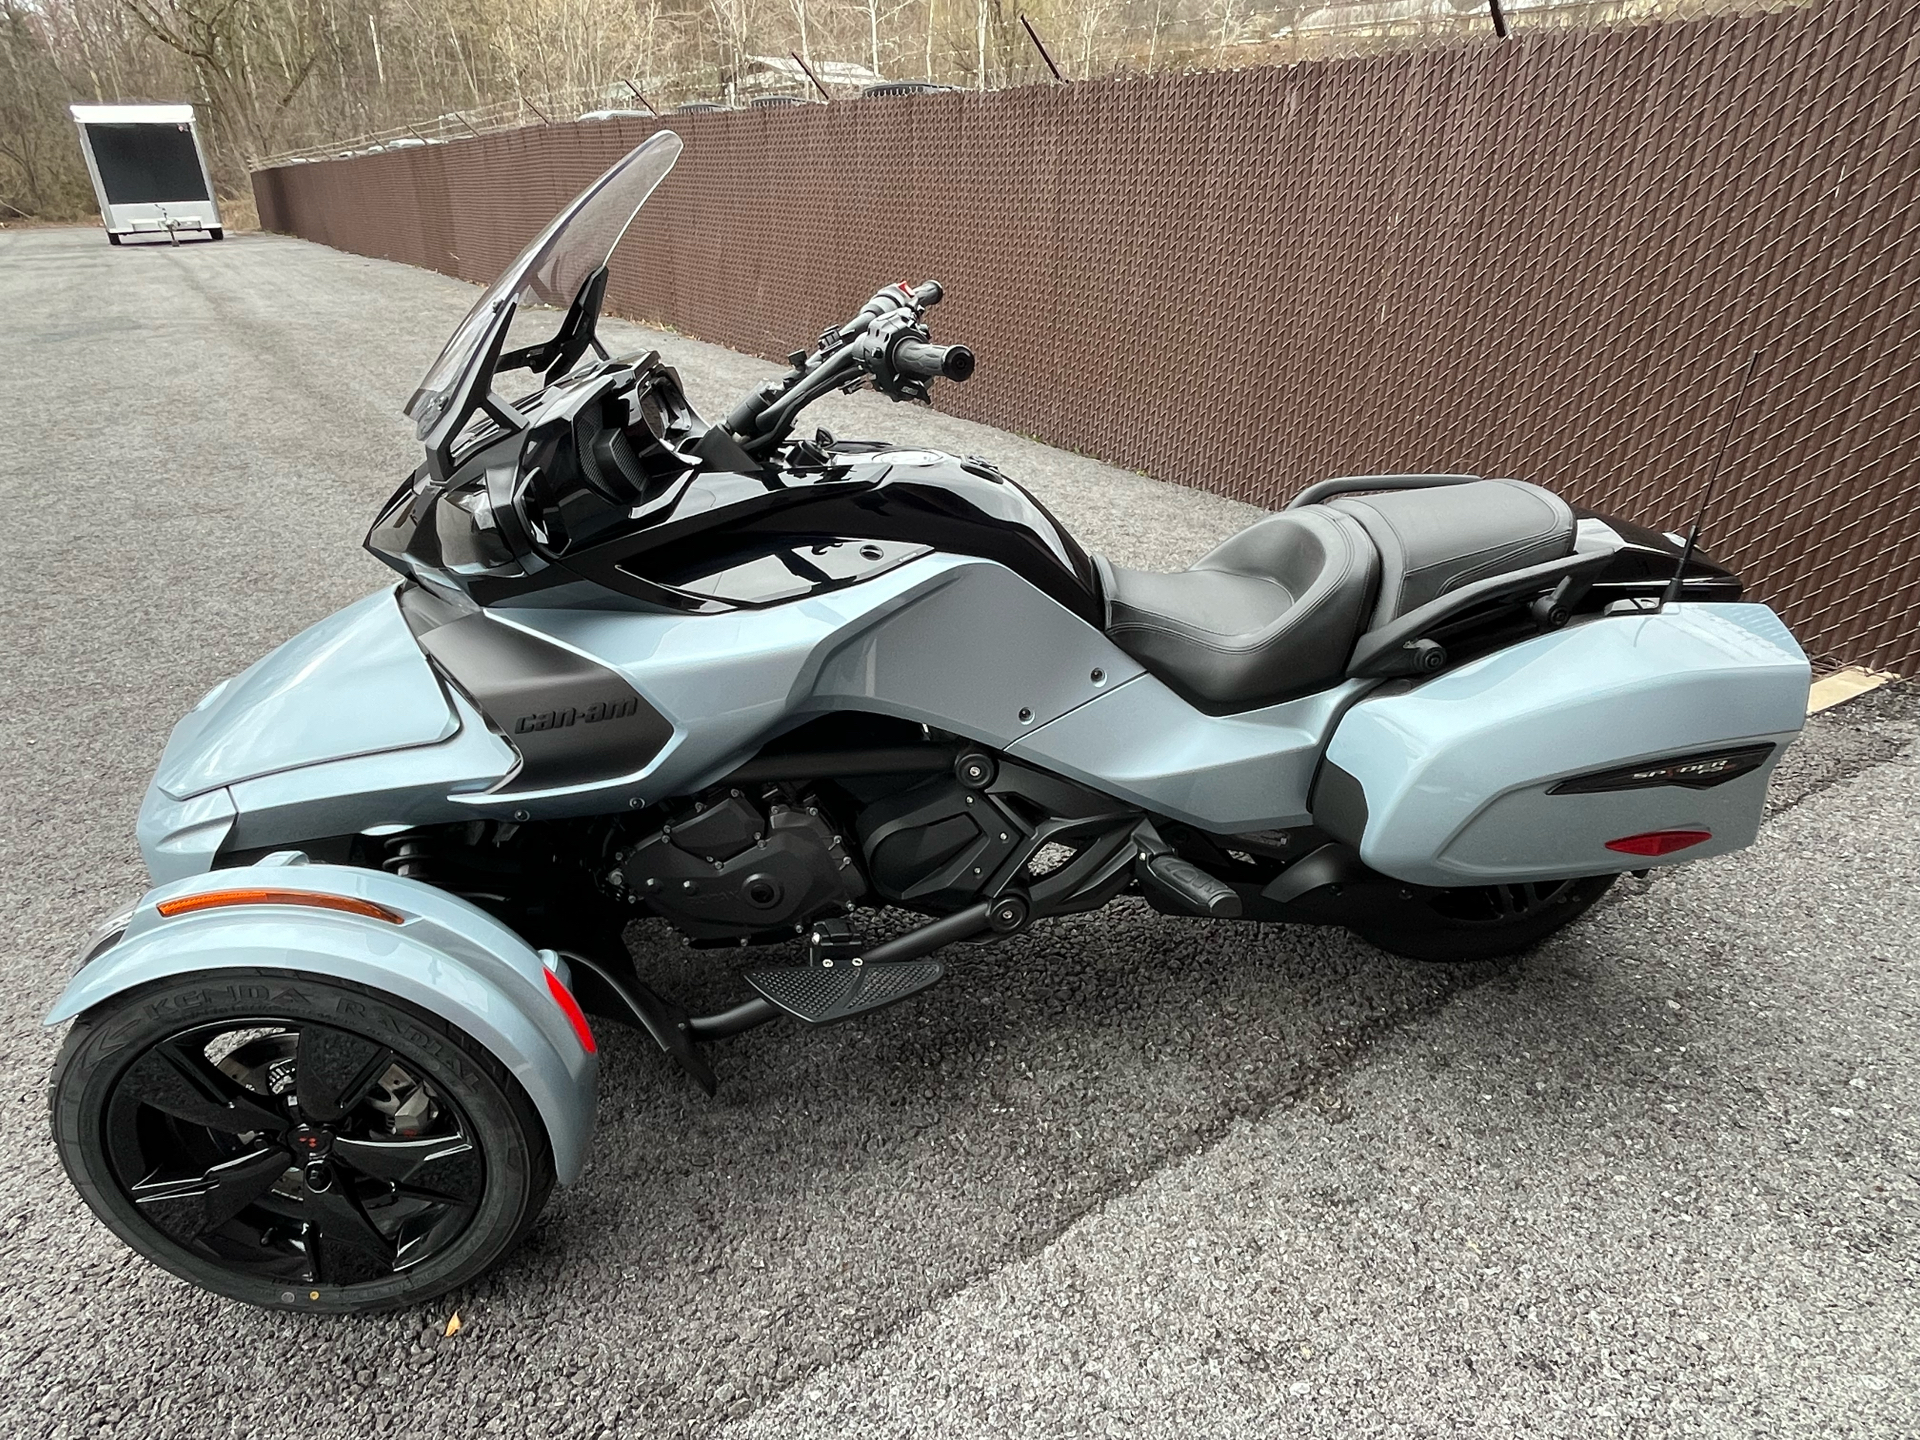 2022 Can-Am Spyder F3-T in Tyrone, Pennsylvania - Photo 4